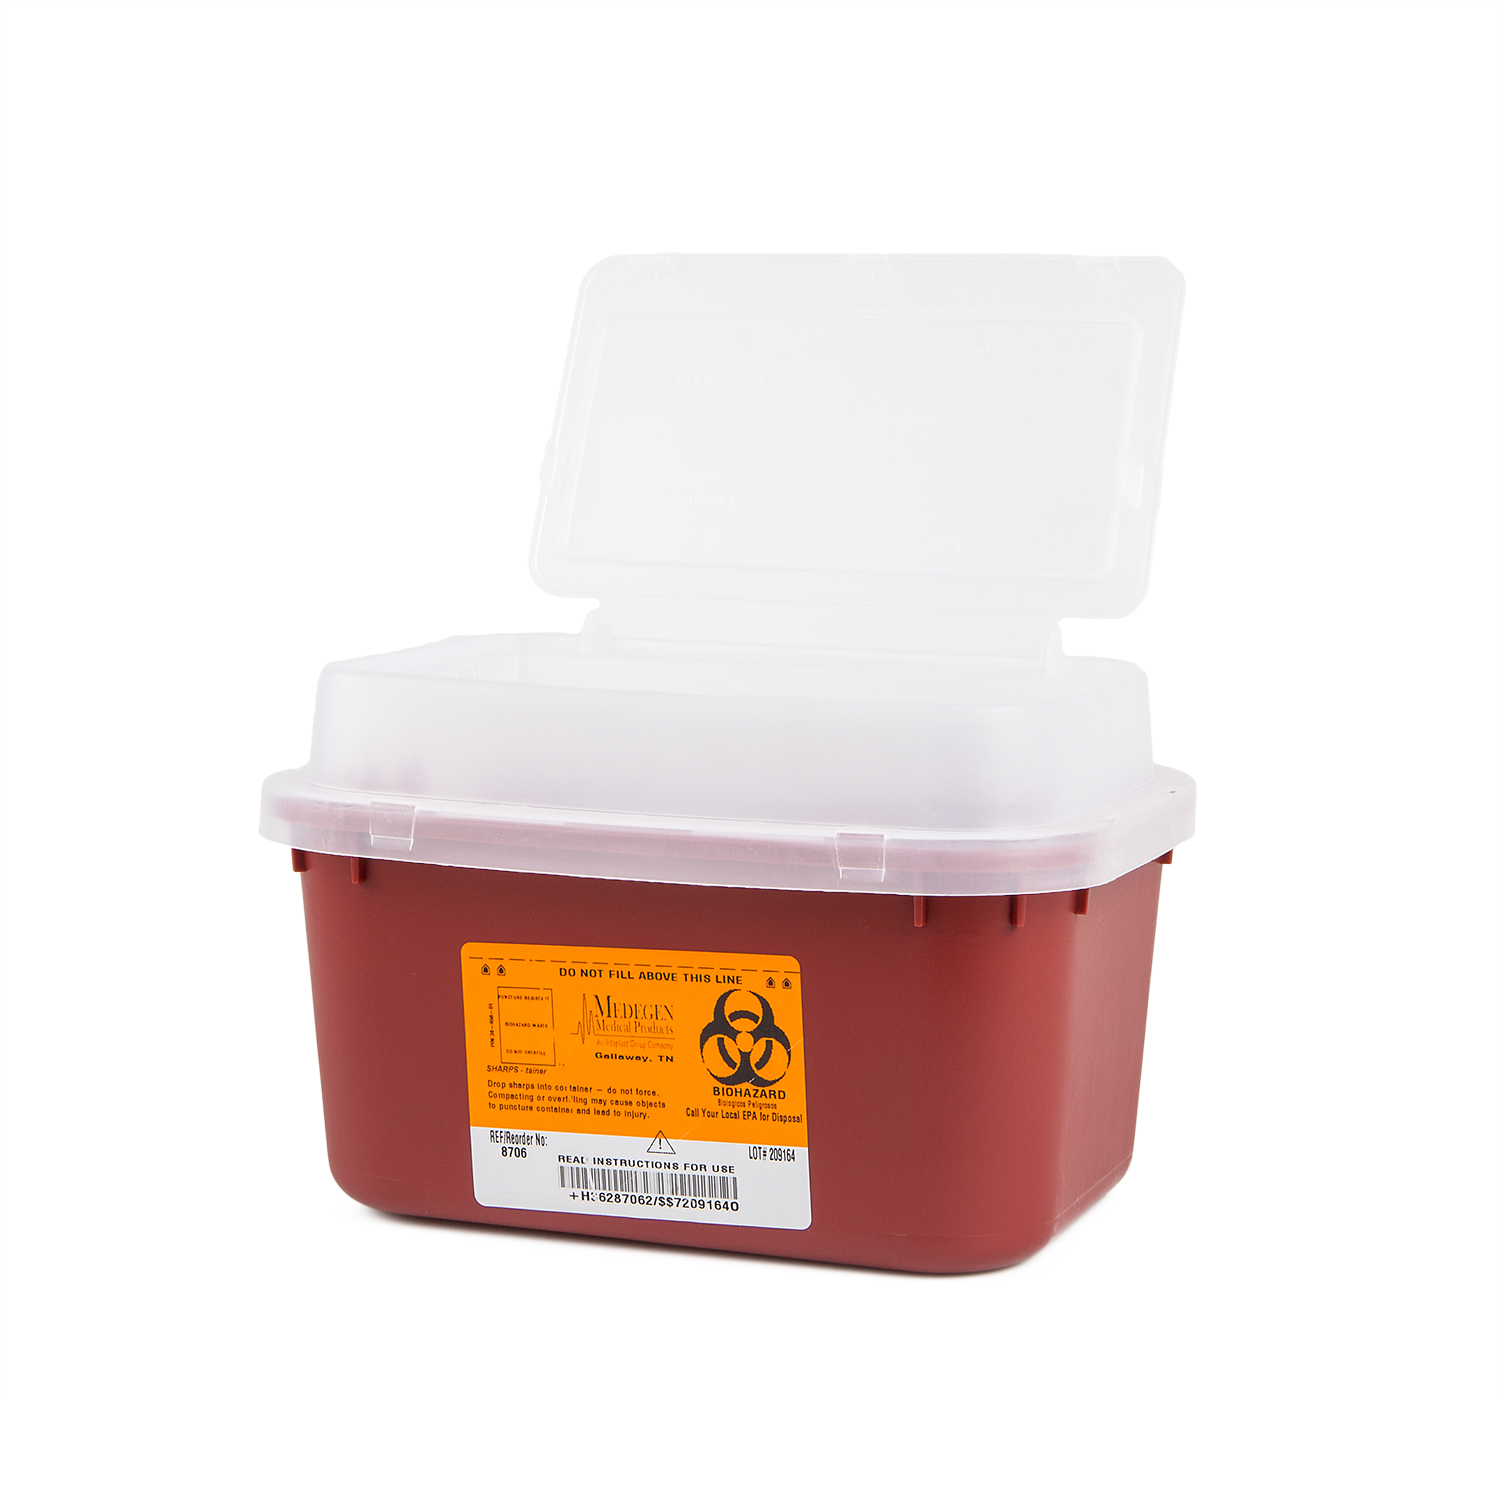 1 Gal Sharps Containers Products, Supplies and Equipment